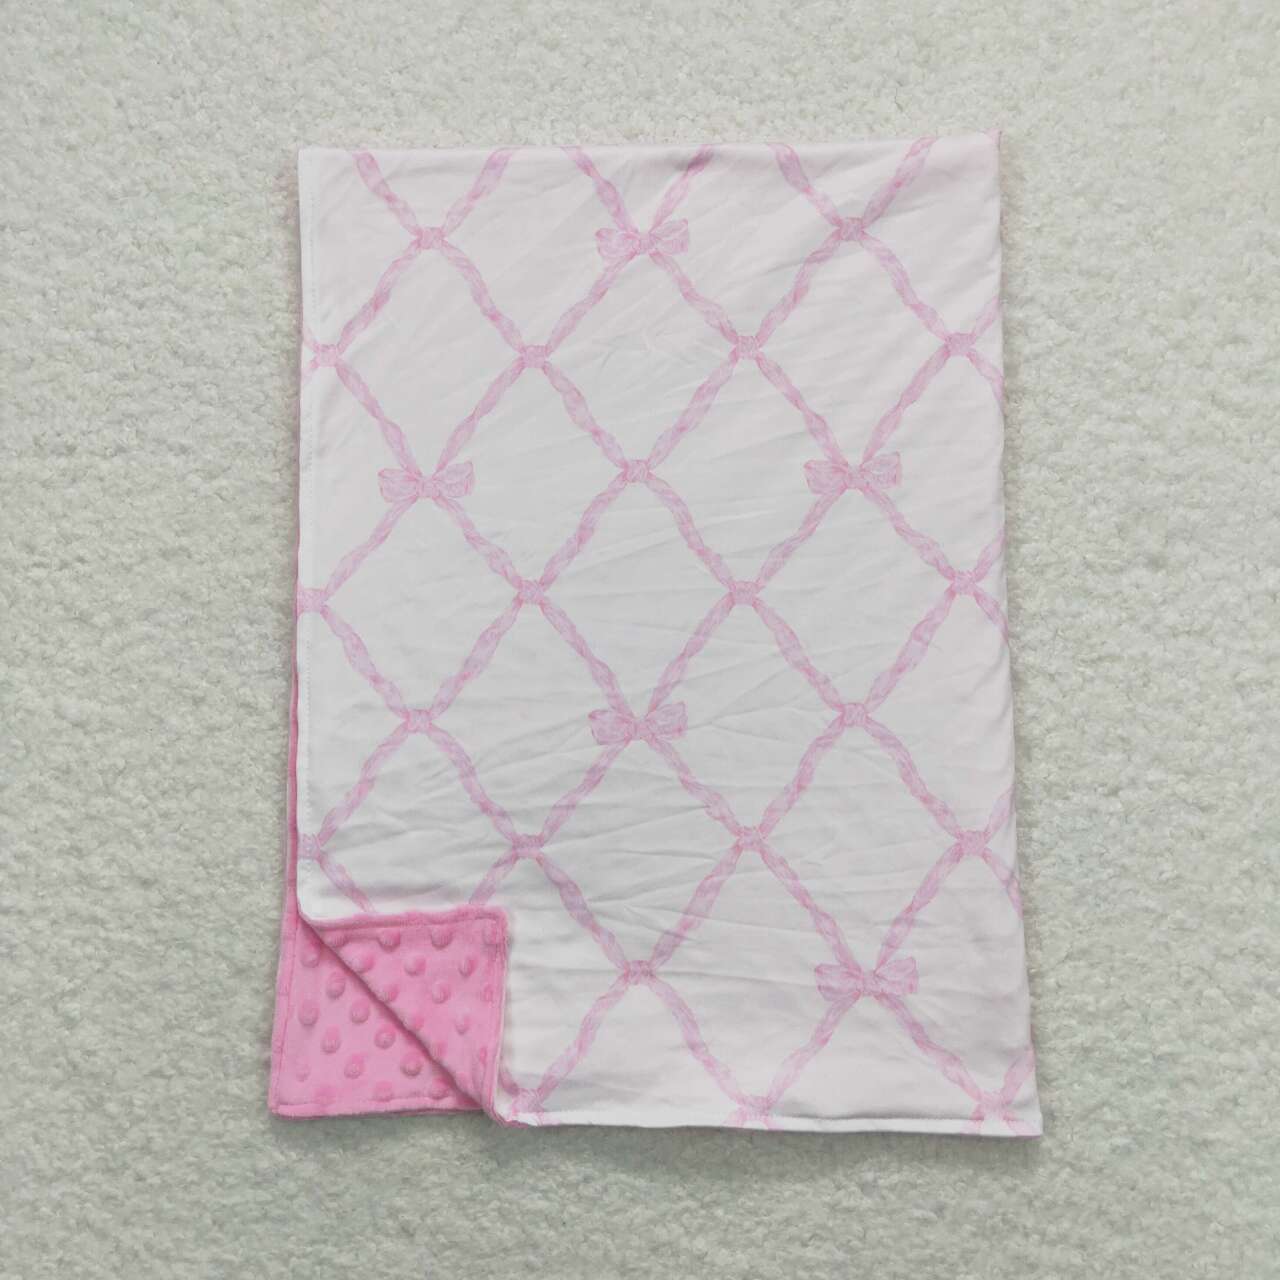 BL0132 Bow pattern pink and white baby blanket